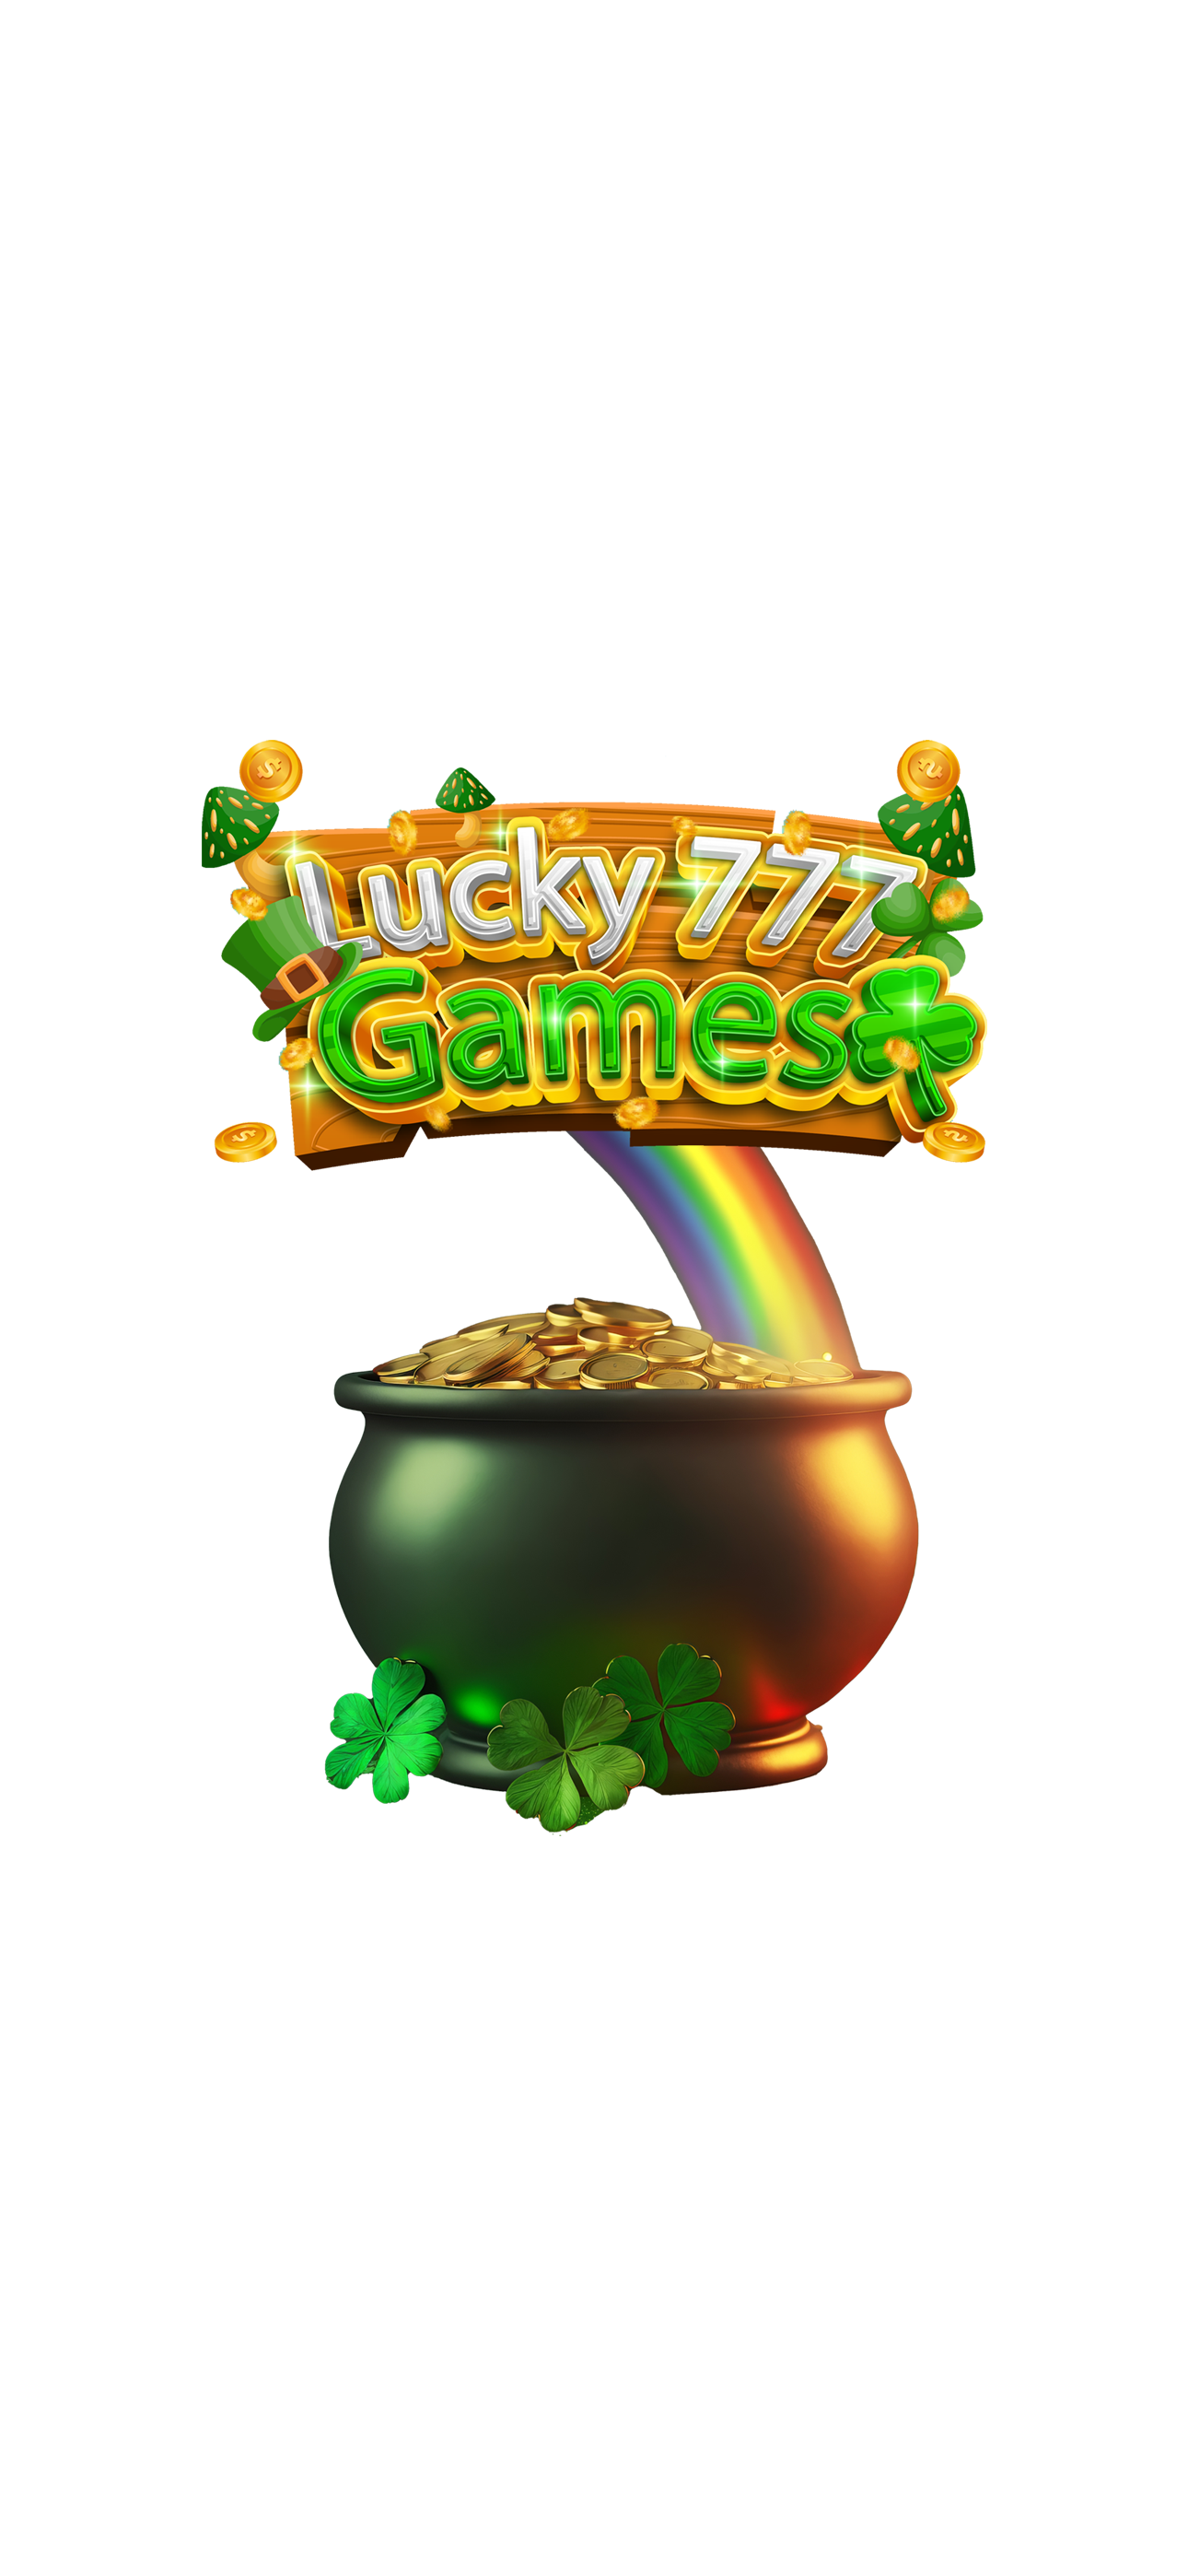 Lucky Games 777 Slots, Blue Dragon Slots, Fire Kirin, Juwa, Orion stars online, Game Vault, Online sweepstake games, play at home slots